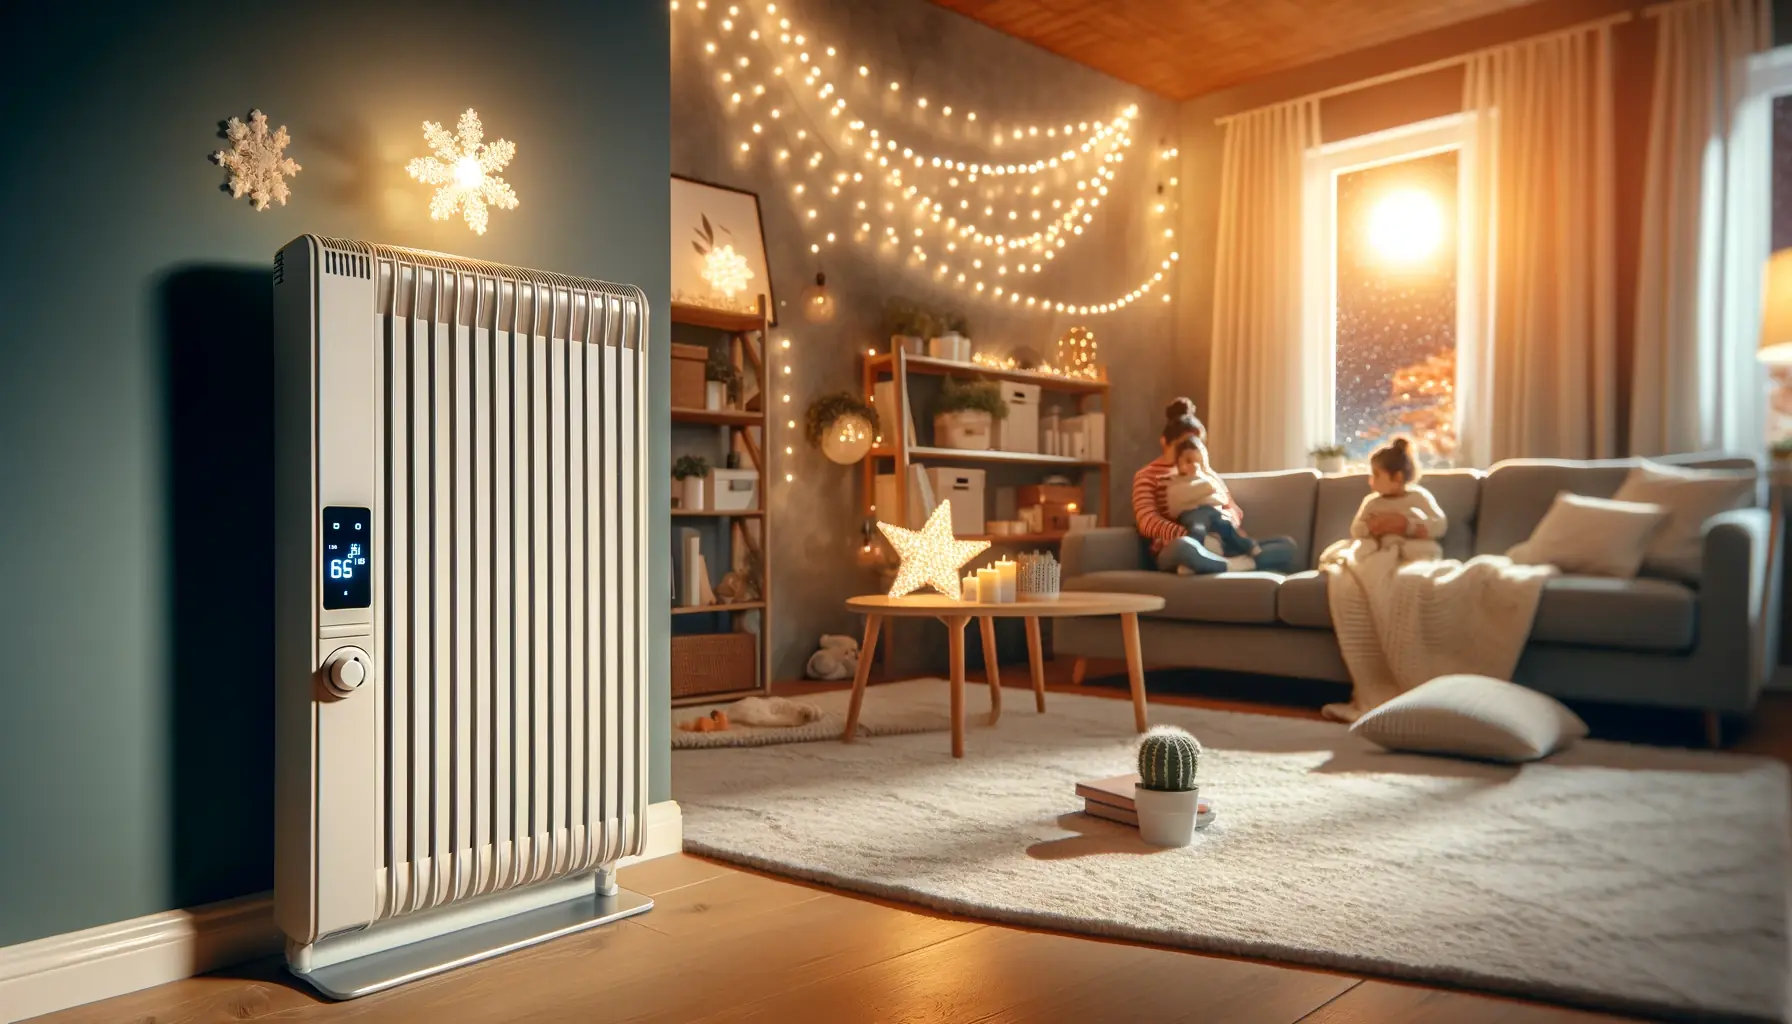 are electric radiators safe . A cozy living room in winter with an electric radiator providing warmth, showcasing its safety features and modern design. The room is well lit and co